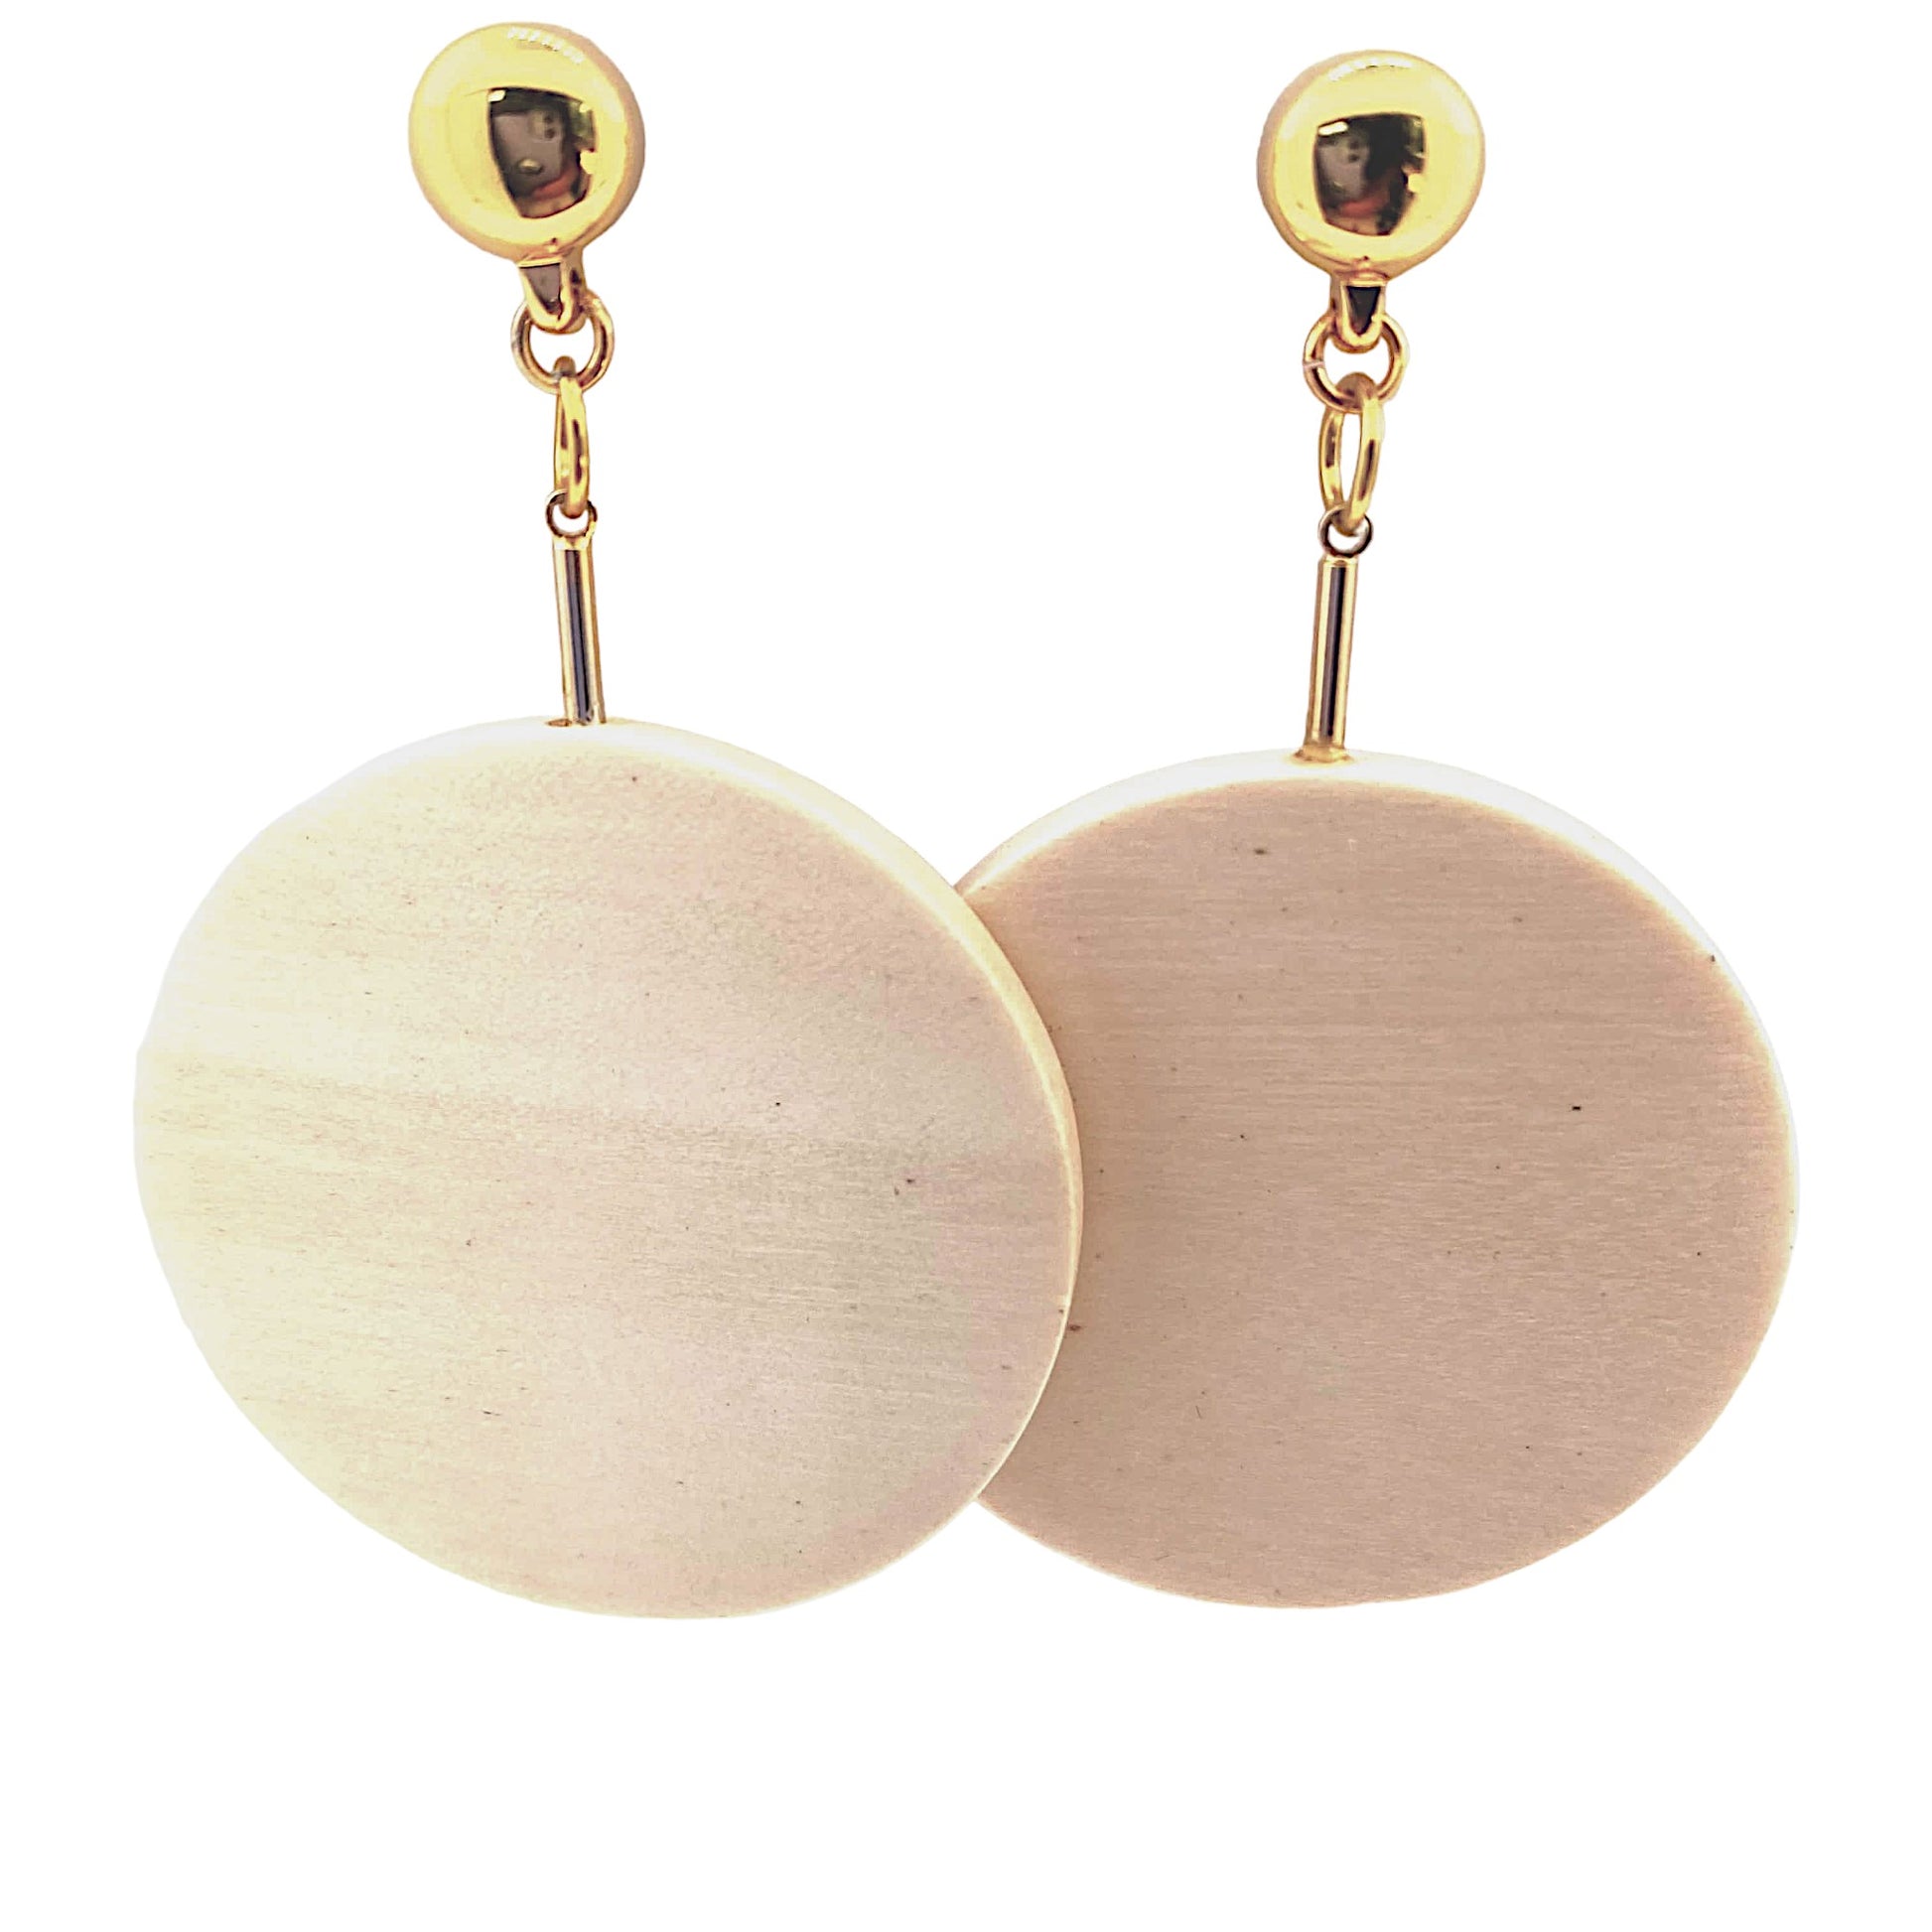 TI-GO Gold drop earring with a hanging wooden disc. Detachable earrings for a truly hypoallergenic jewellery on a white background